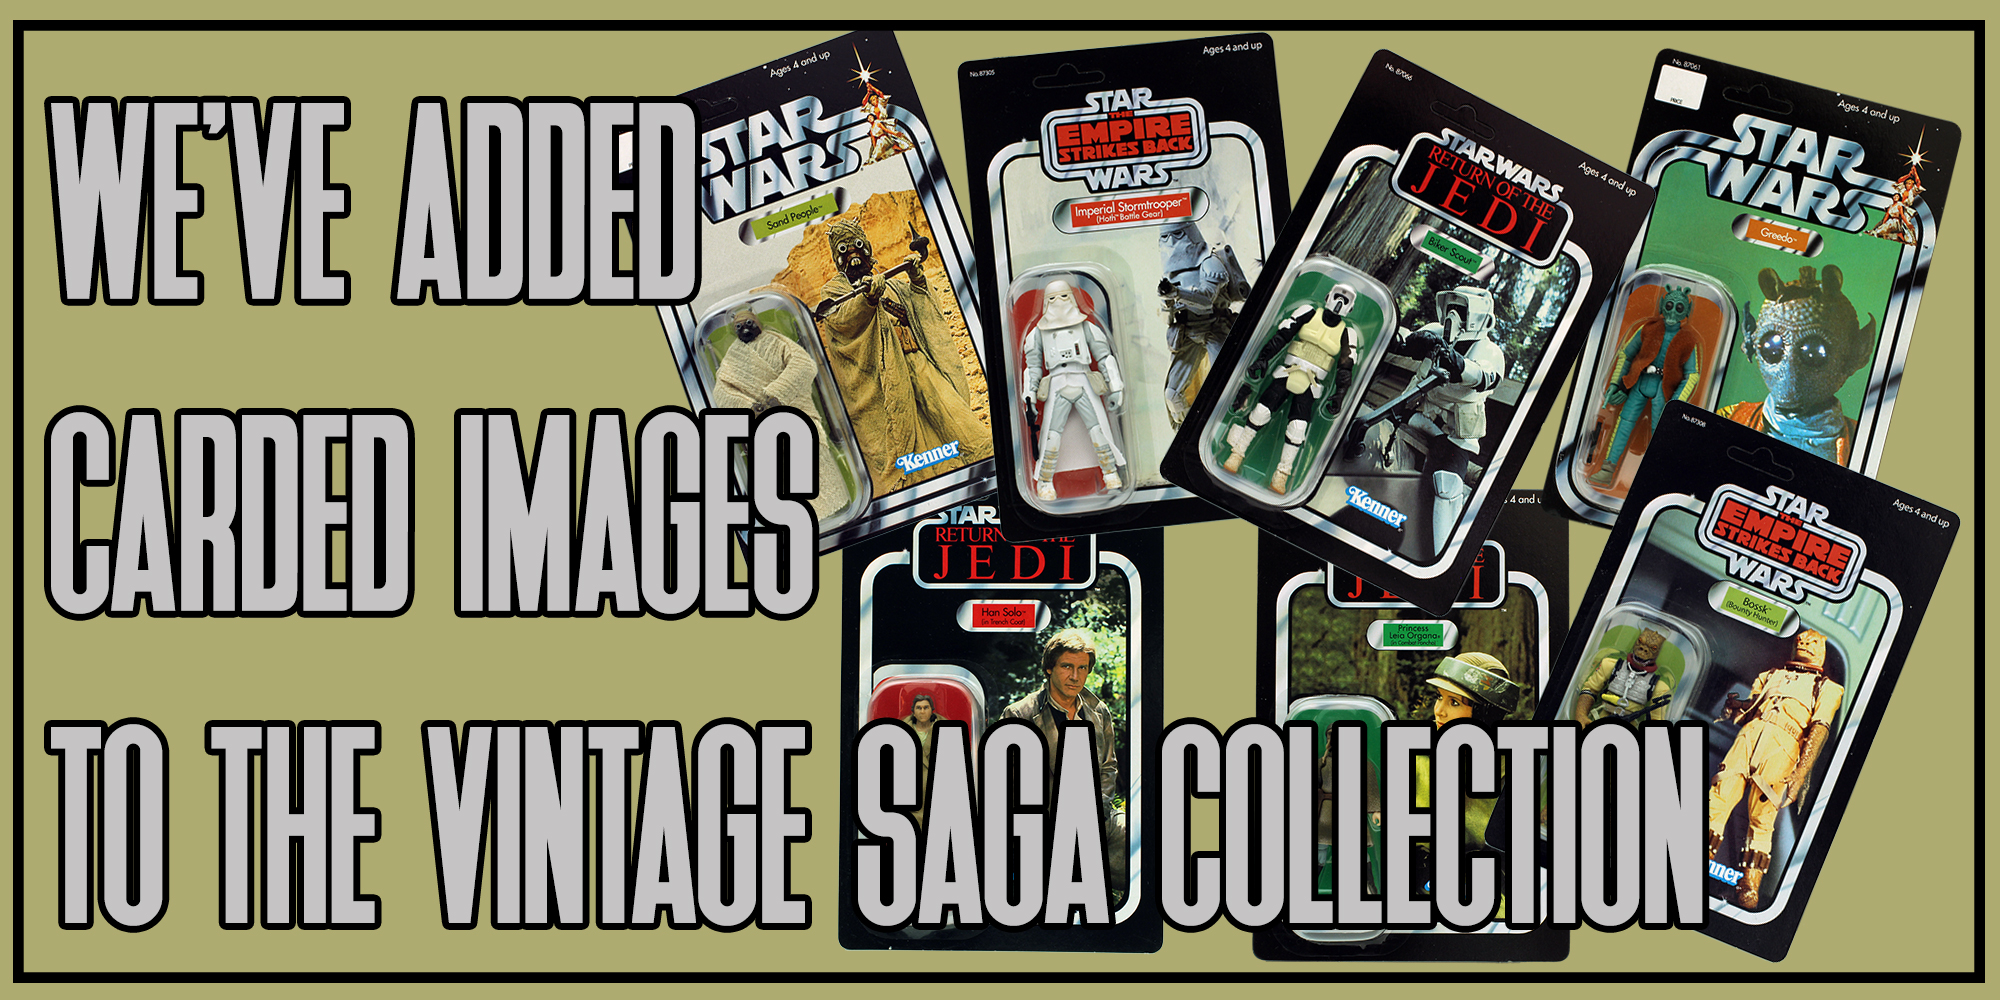 Carded Image Update For The Vintage SAGA Collection